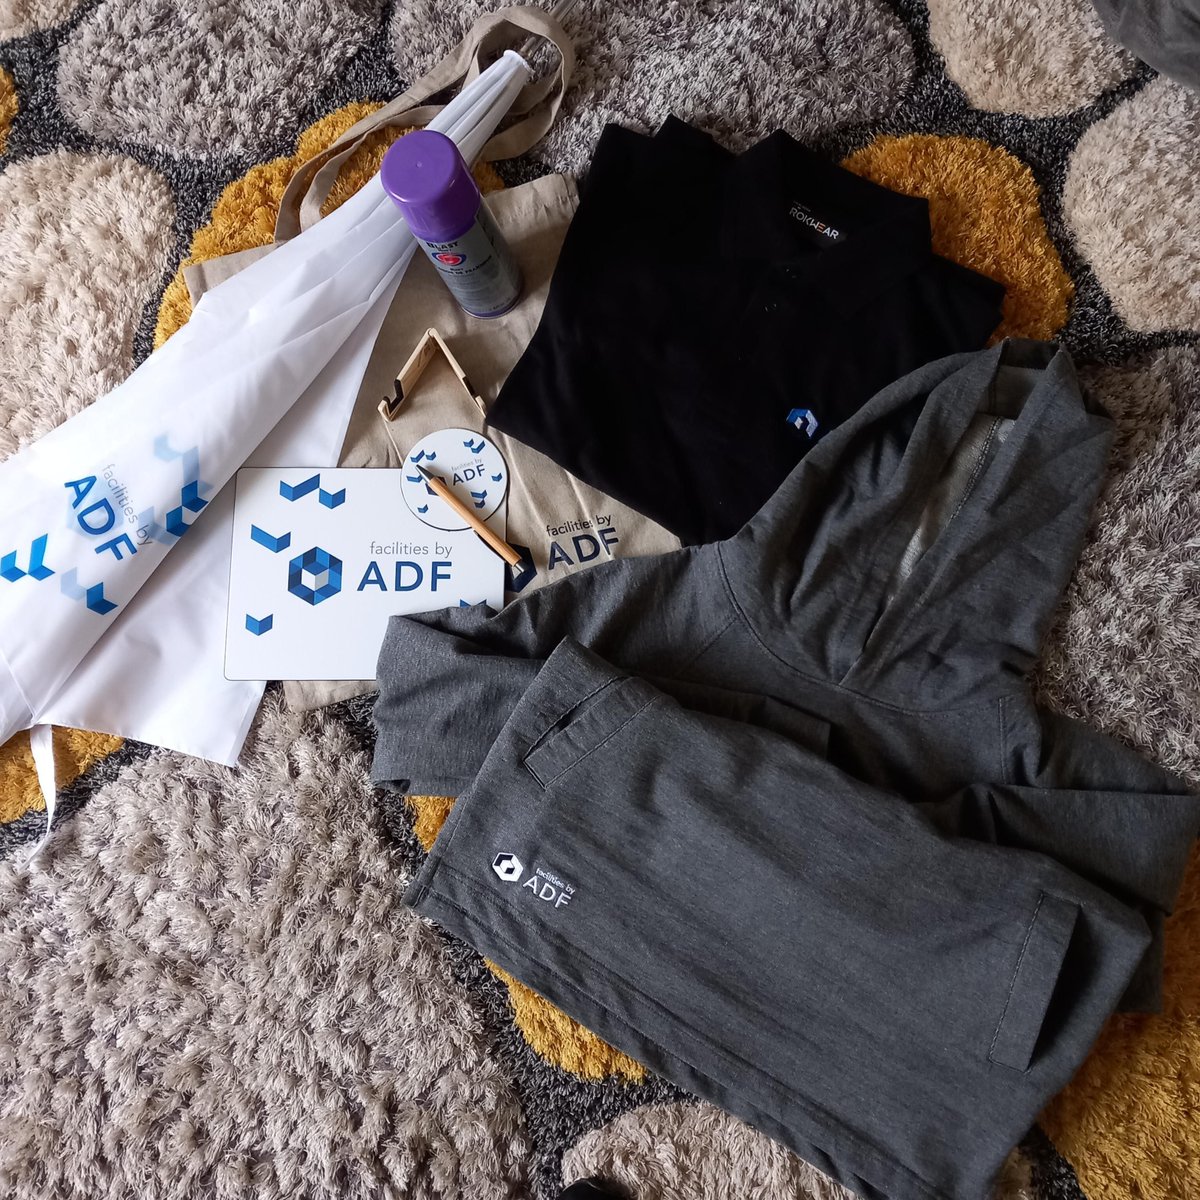 🎁 Vicki came back with some awesome gifts after a site visit over at Facilities at ADF! Earlier this week we carried out a health and safety audit for Facilities at ADF 😊 keep an eye out for more site visit snaps 📸 #healthandsafety #onsite #teamwork